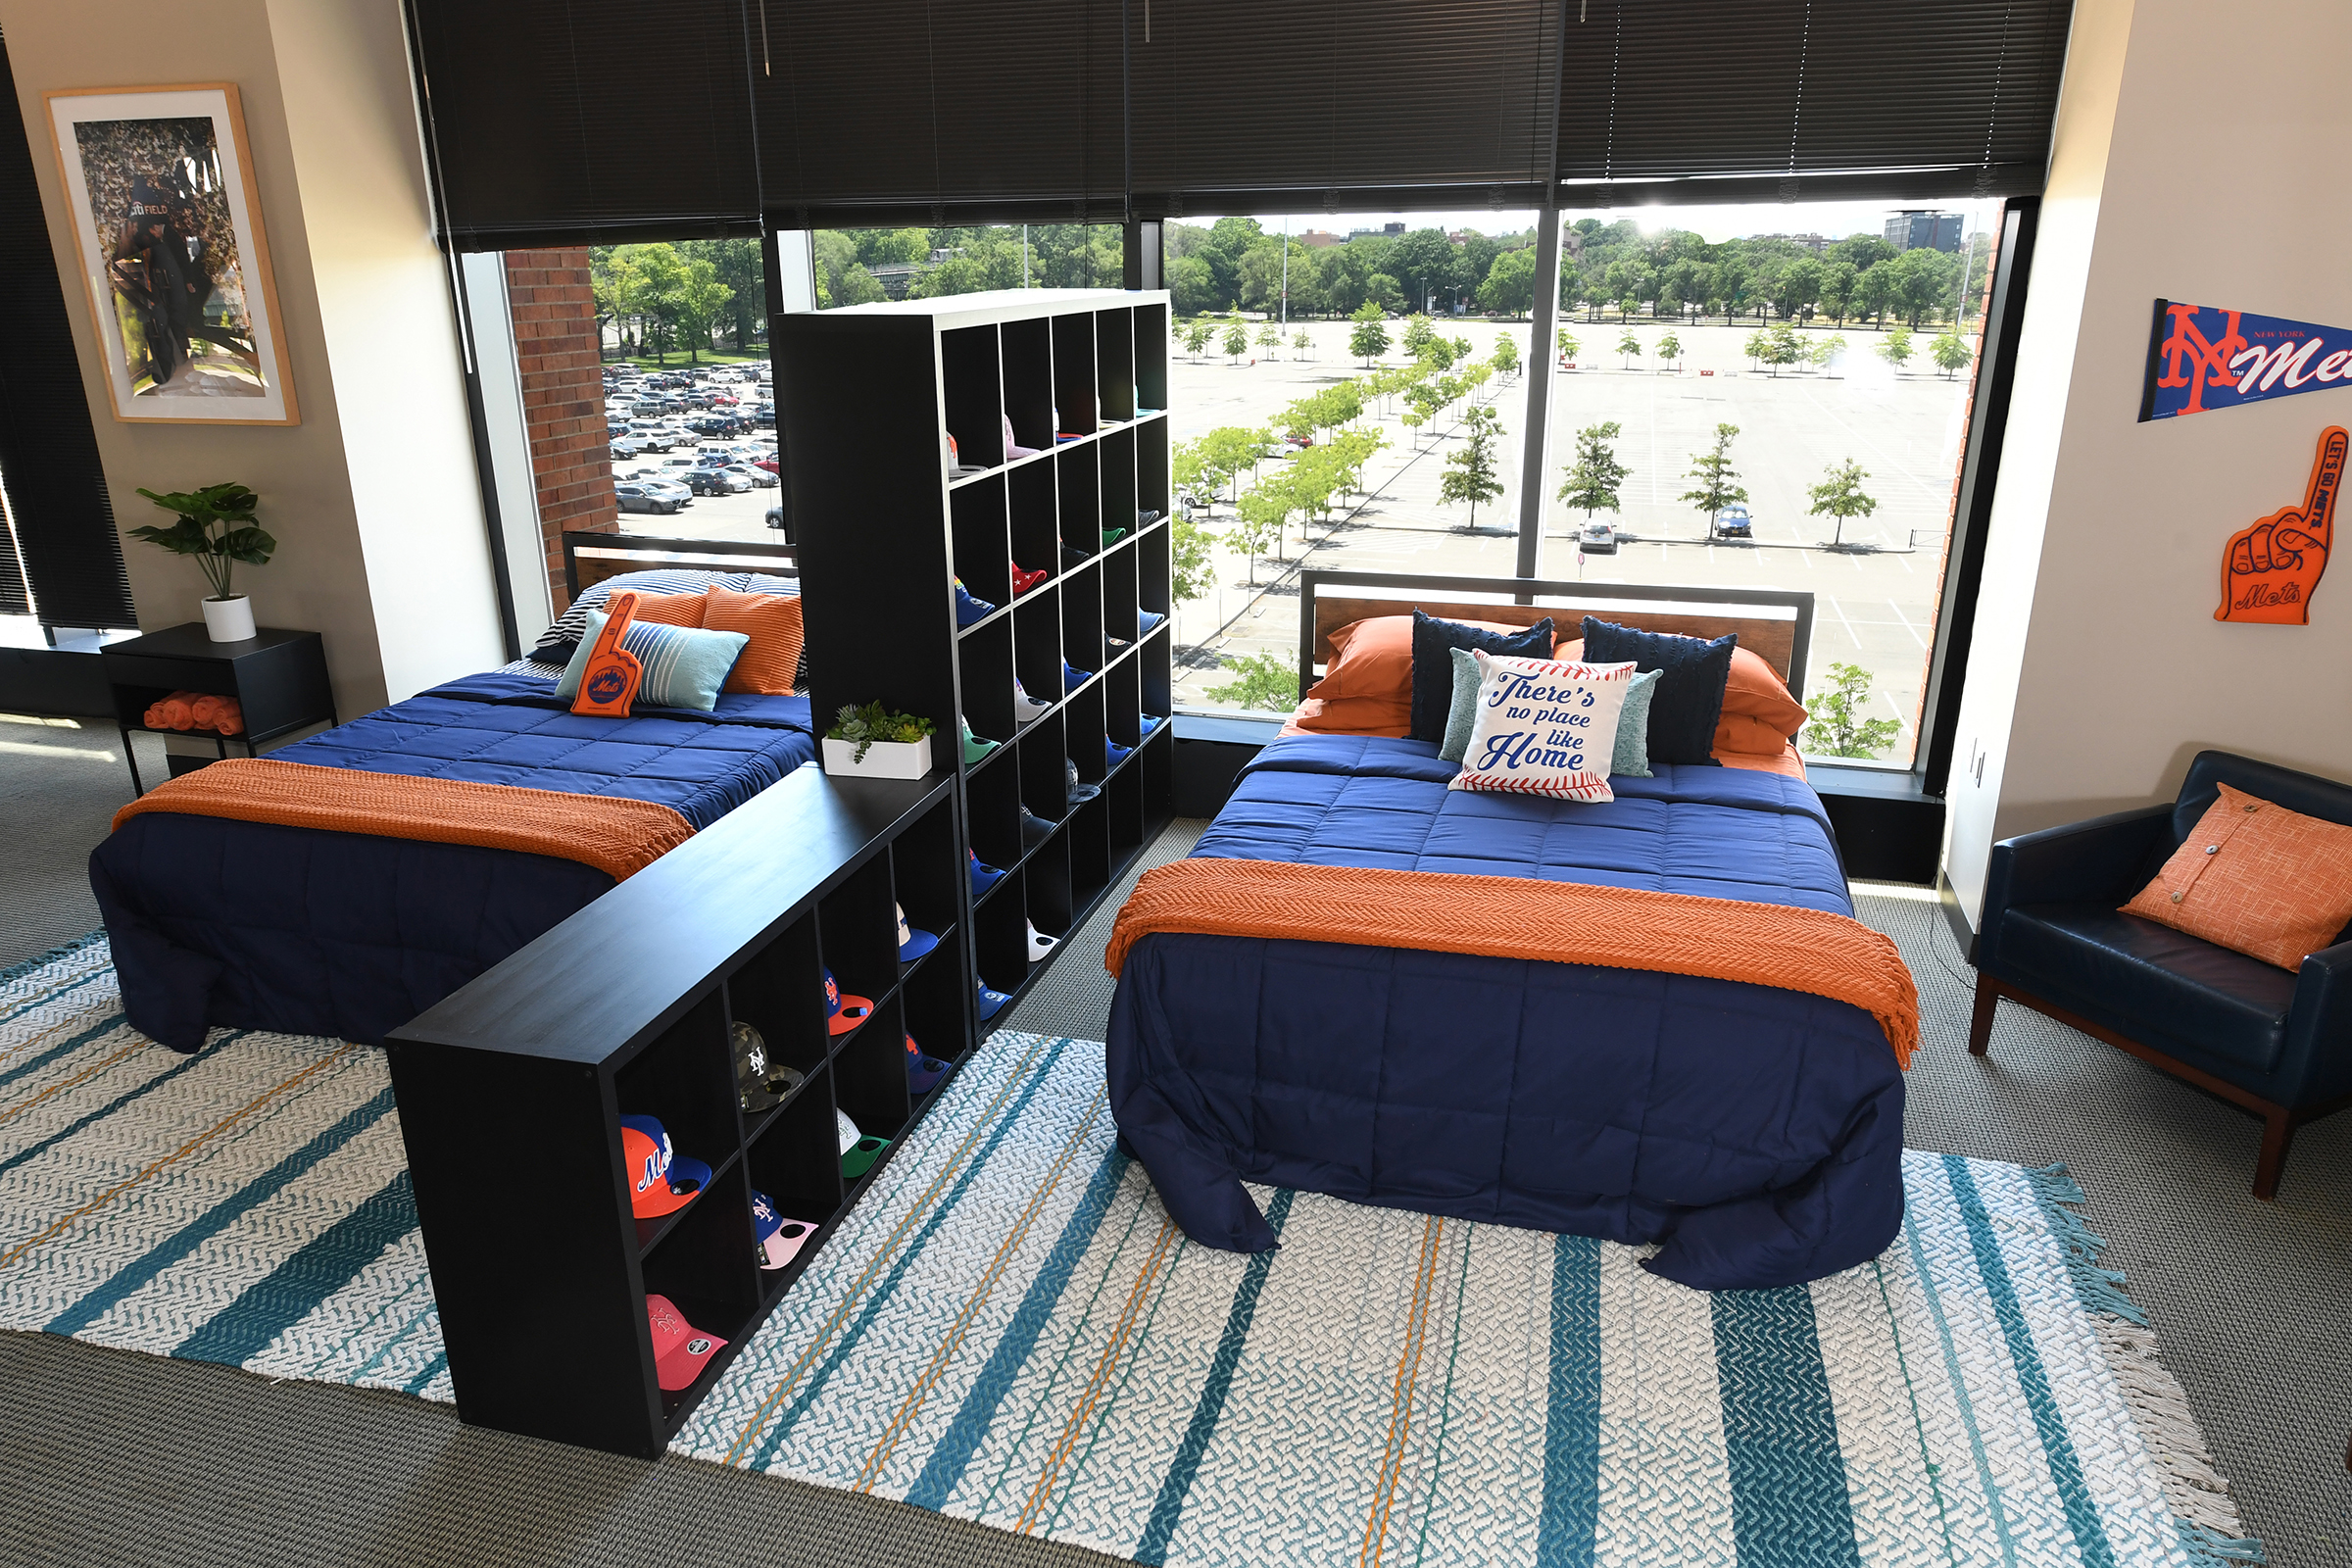 The Citi Field bedroom with a blue quit and orange throw blanket, with a bookshelf full of baseball caps in the background.